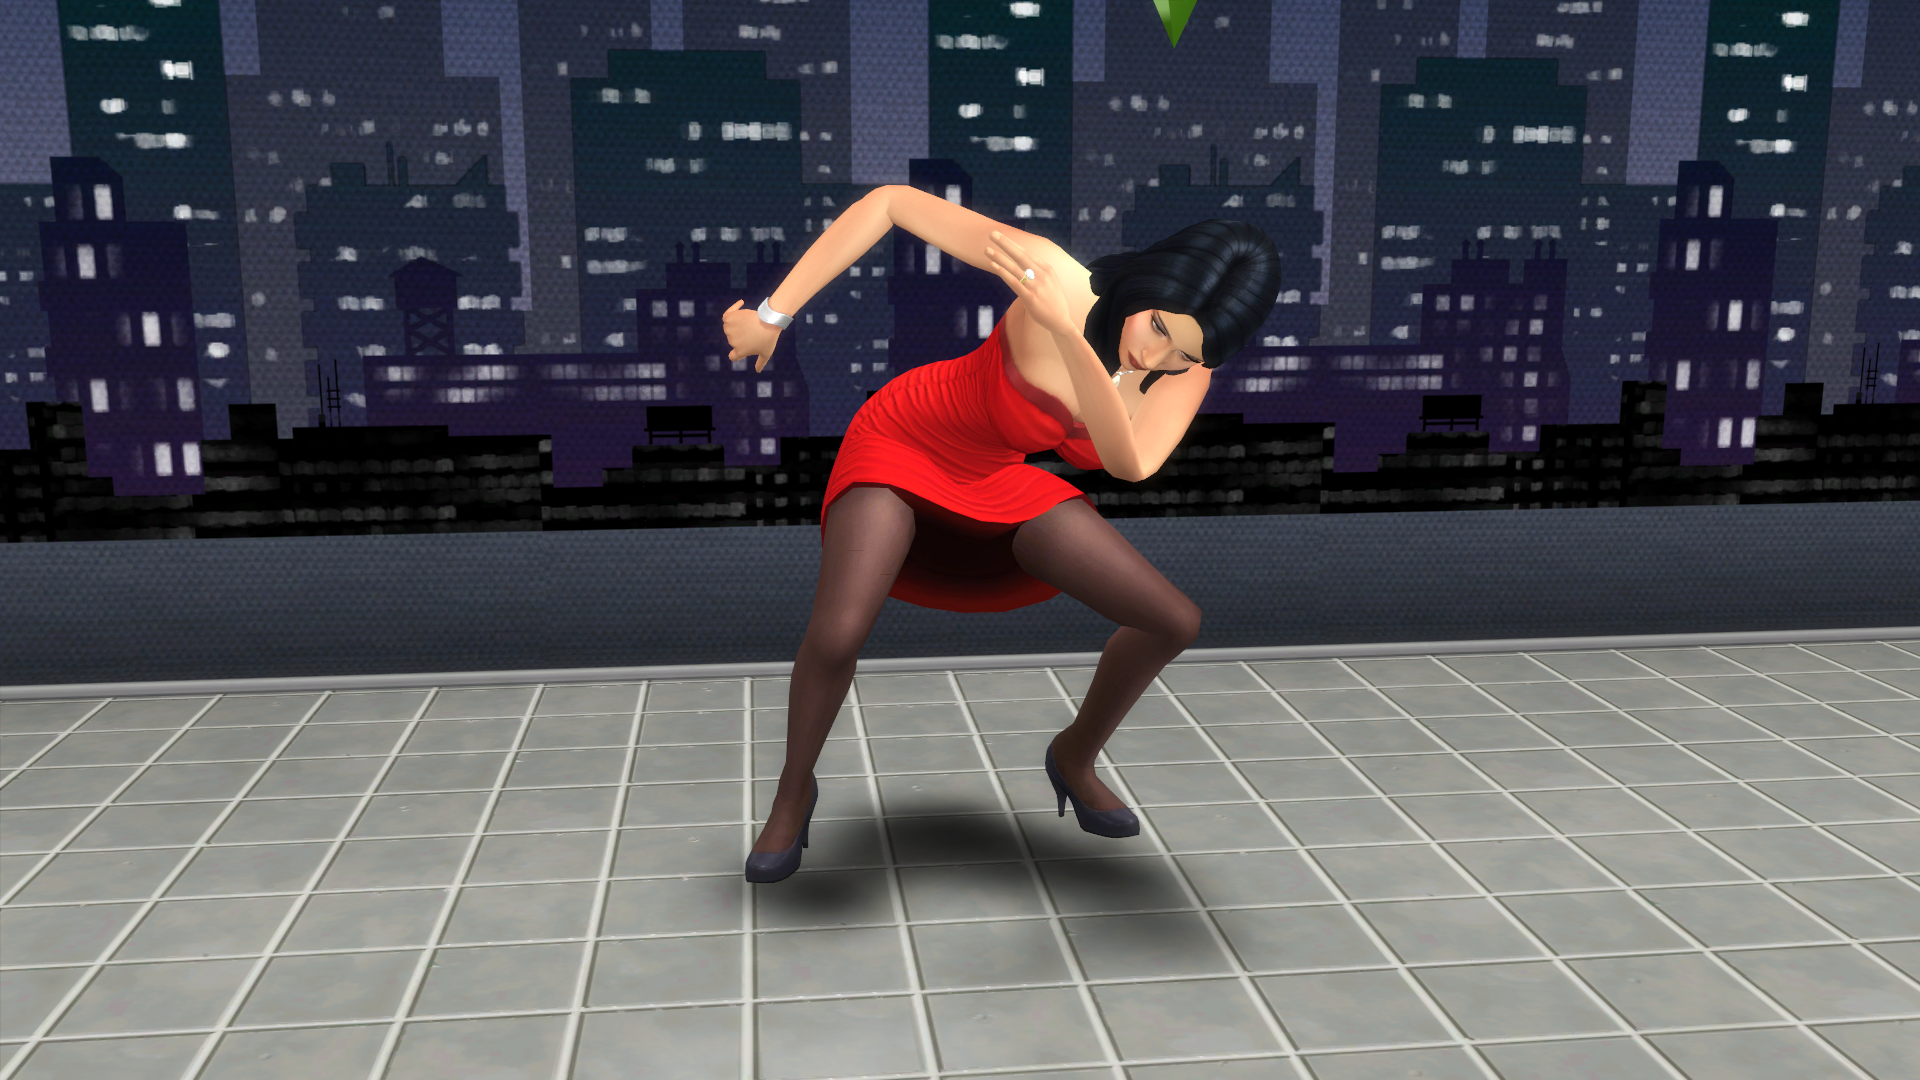 The sims 4 magic mike requested dance, rap without mic animation. 